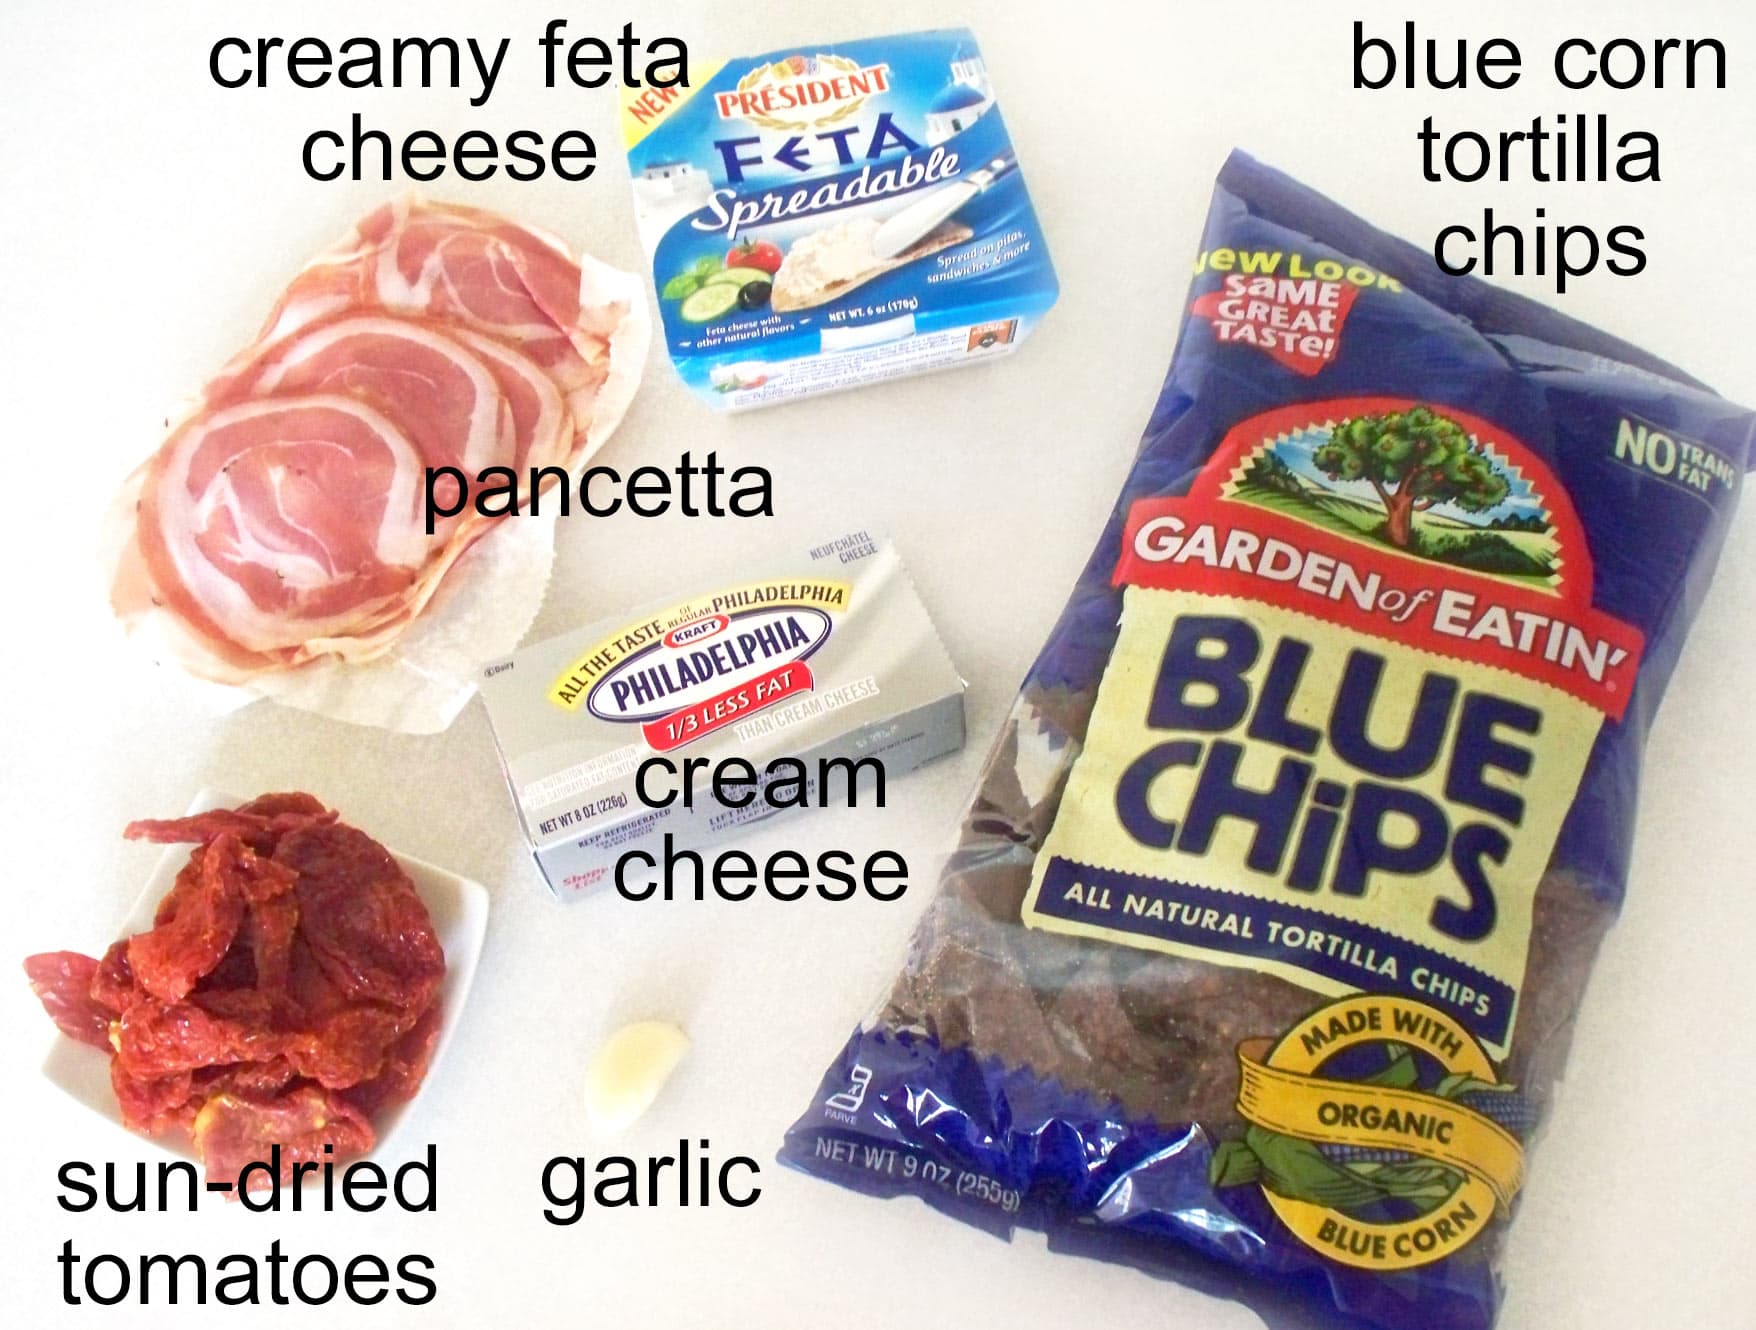 cheese ball witch hat ingredients including pancetta, creamy feta cheese, cream cheese, sun-dried tomatoes, garlic, and blue corn tortilla chips.